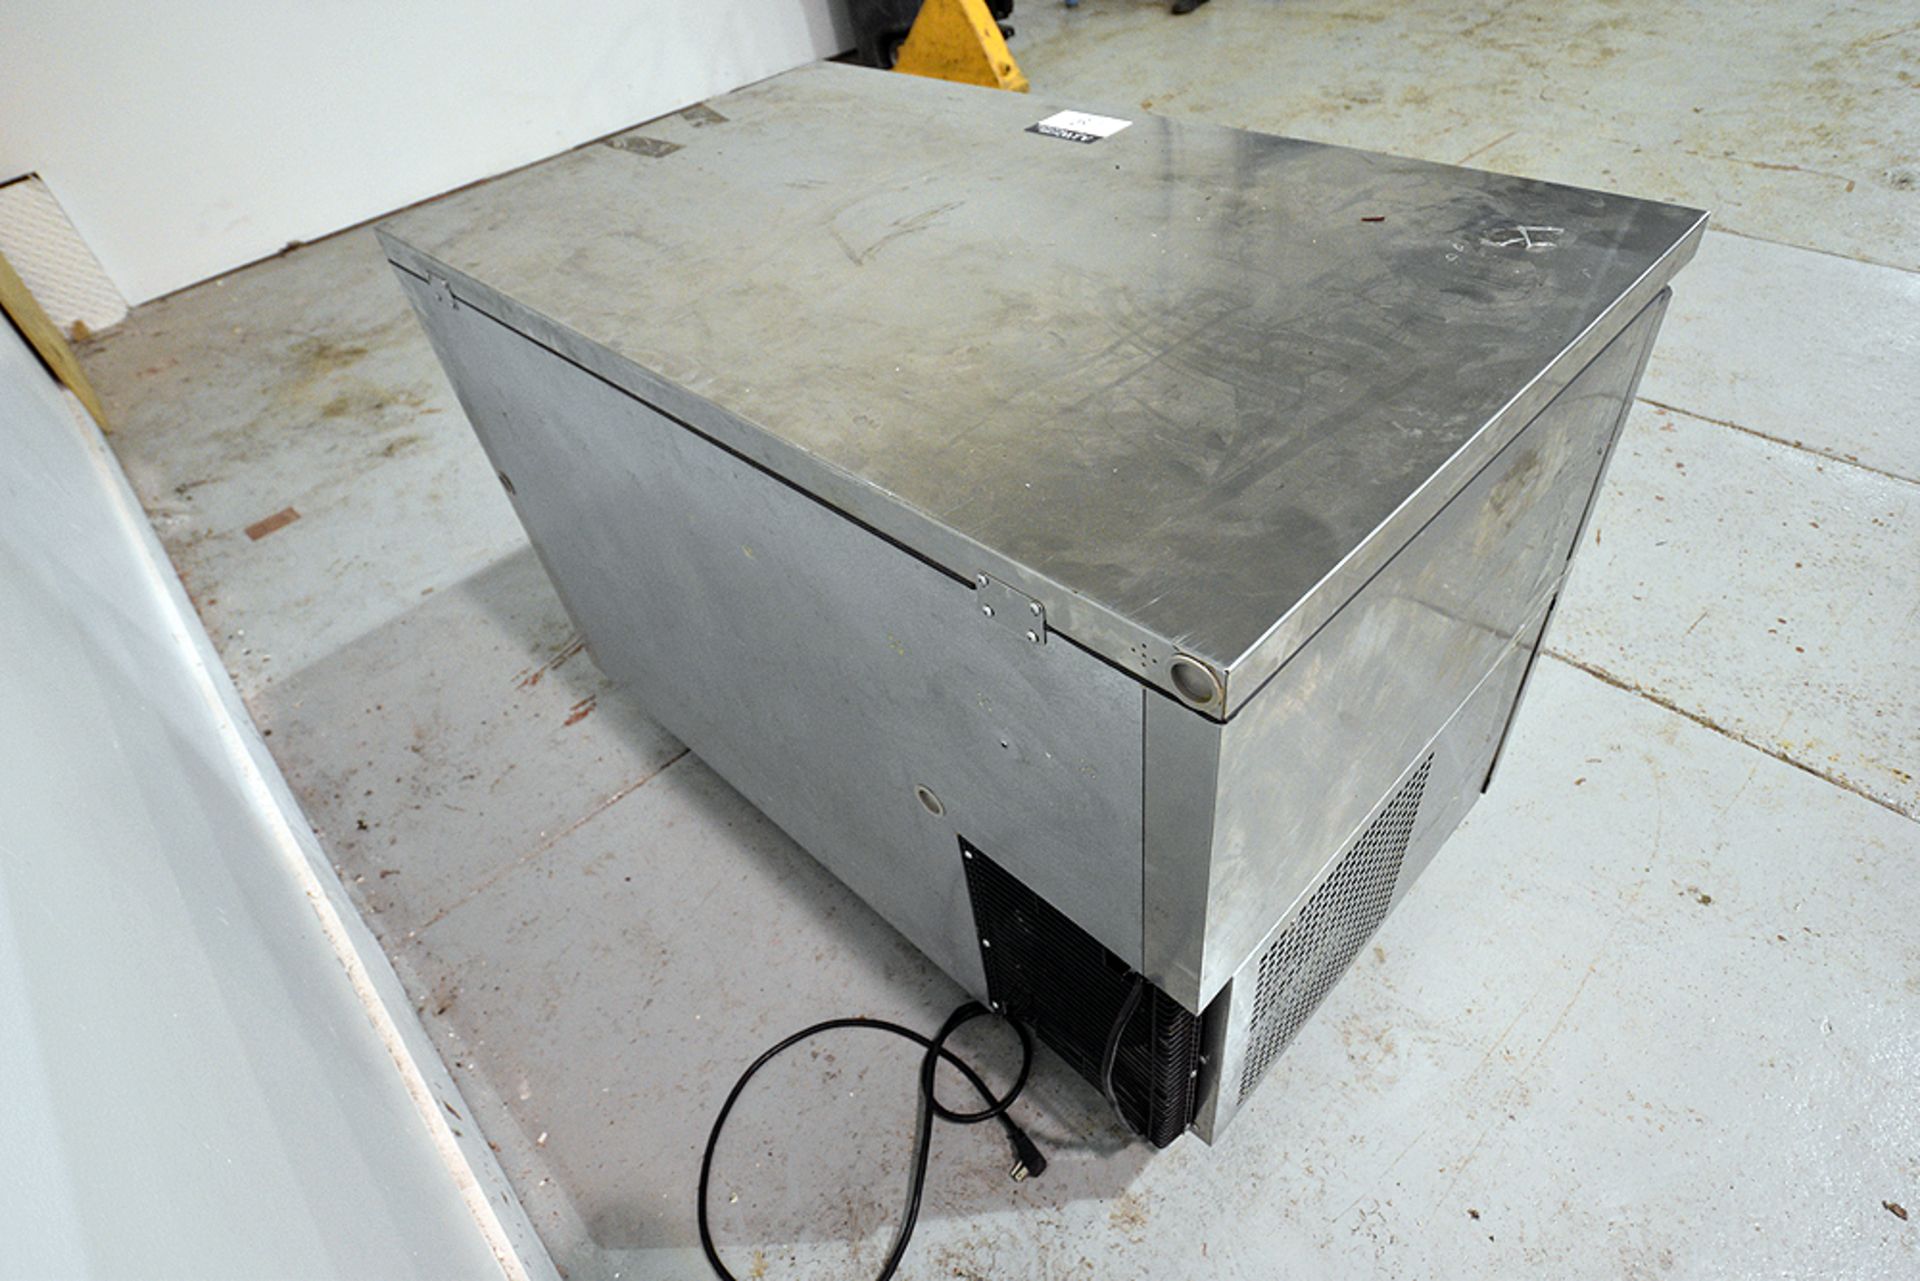 Turbo Air Model JUR-48 Refrigerated Cabinet - Image 8 of 8